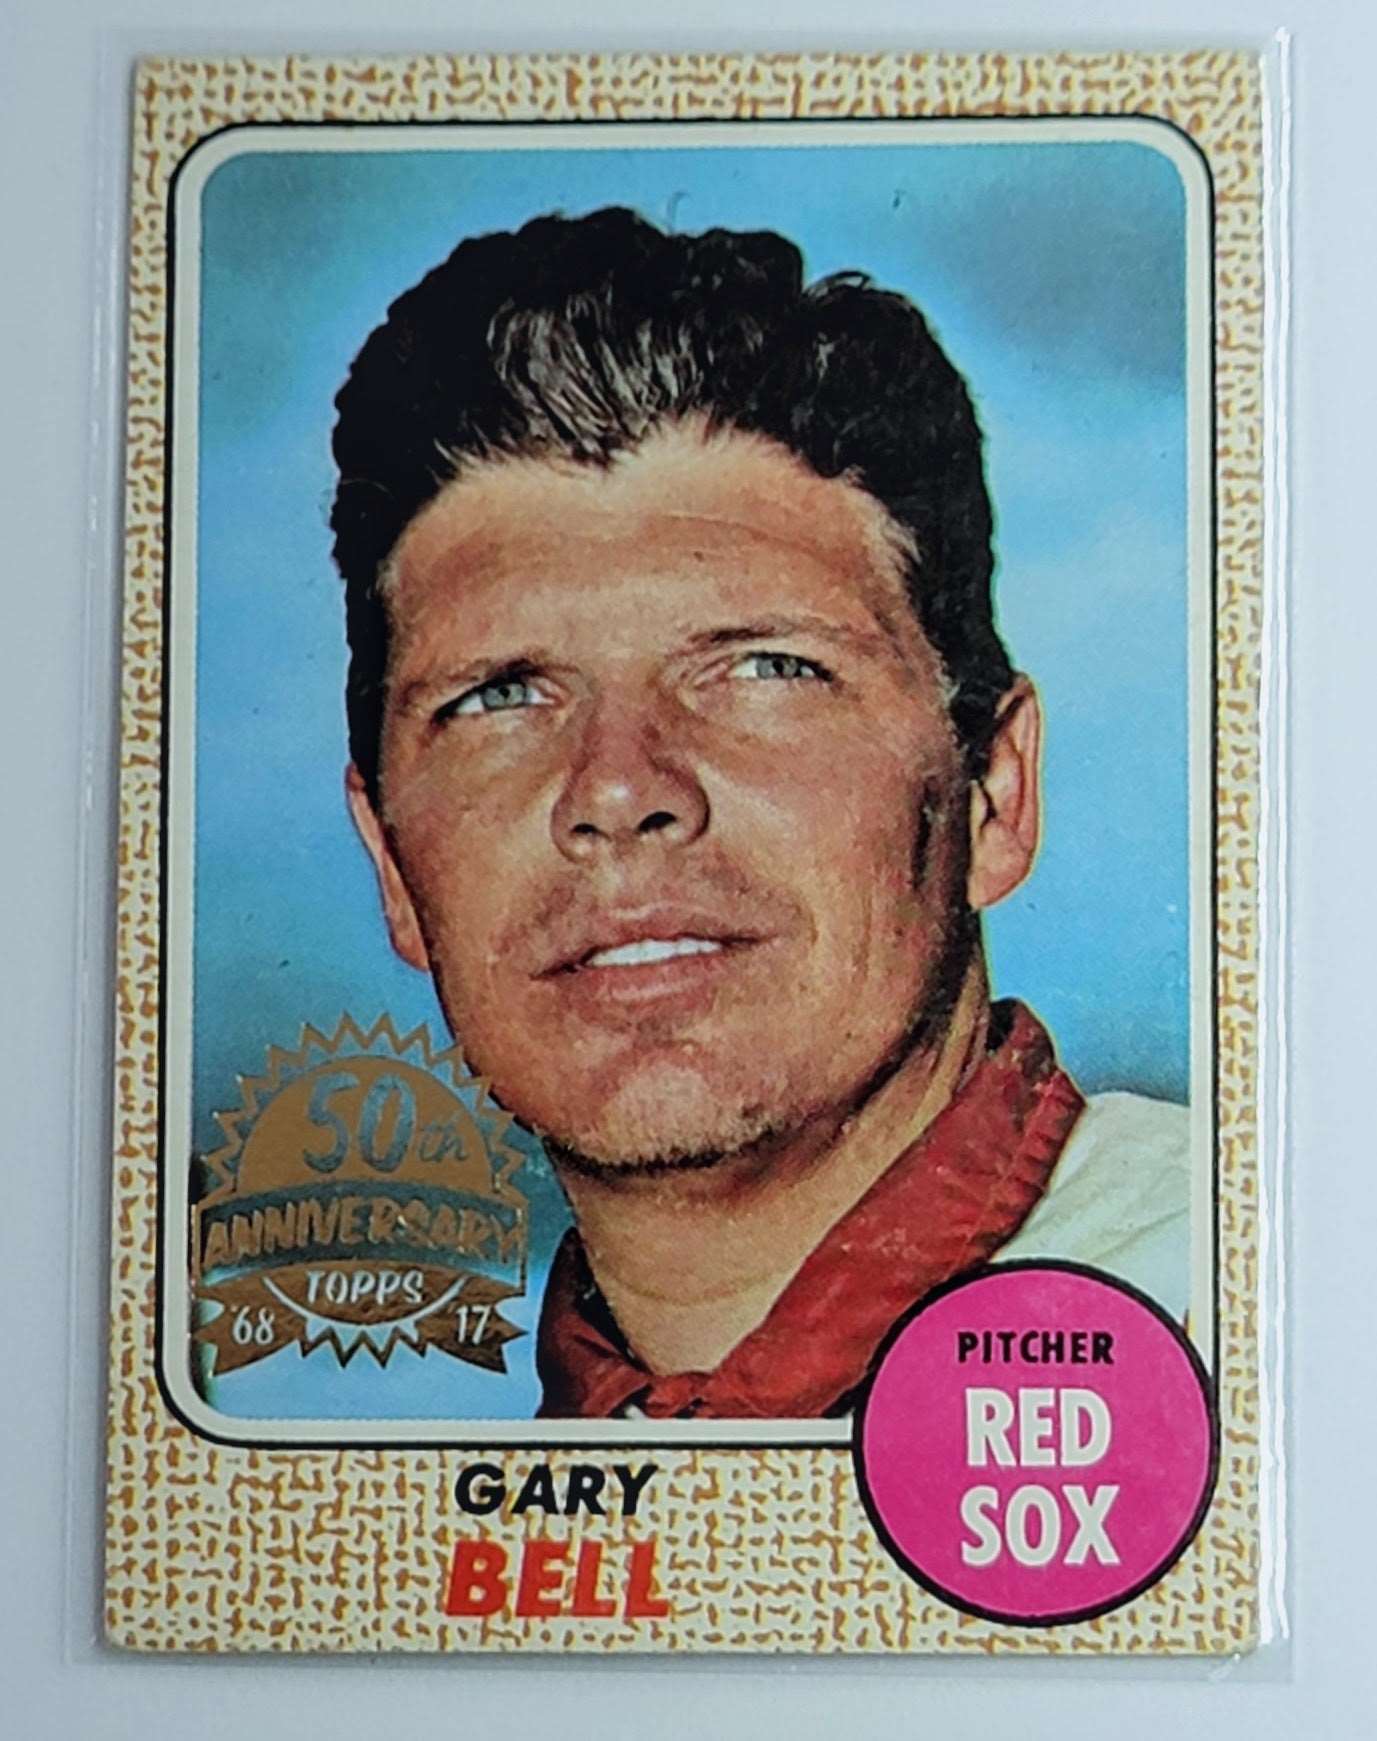 1968 Topps Gary Bell 50th Anniversary Stamped Baseball Card  TH13C simple Xclusive Collectibles   